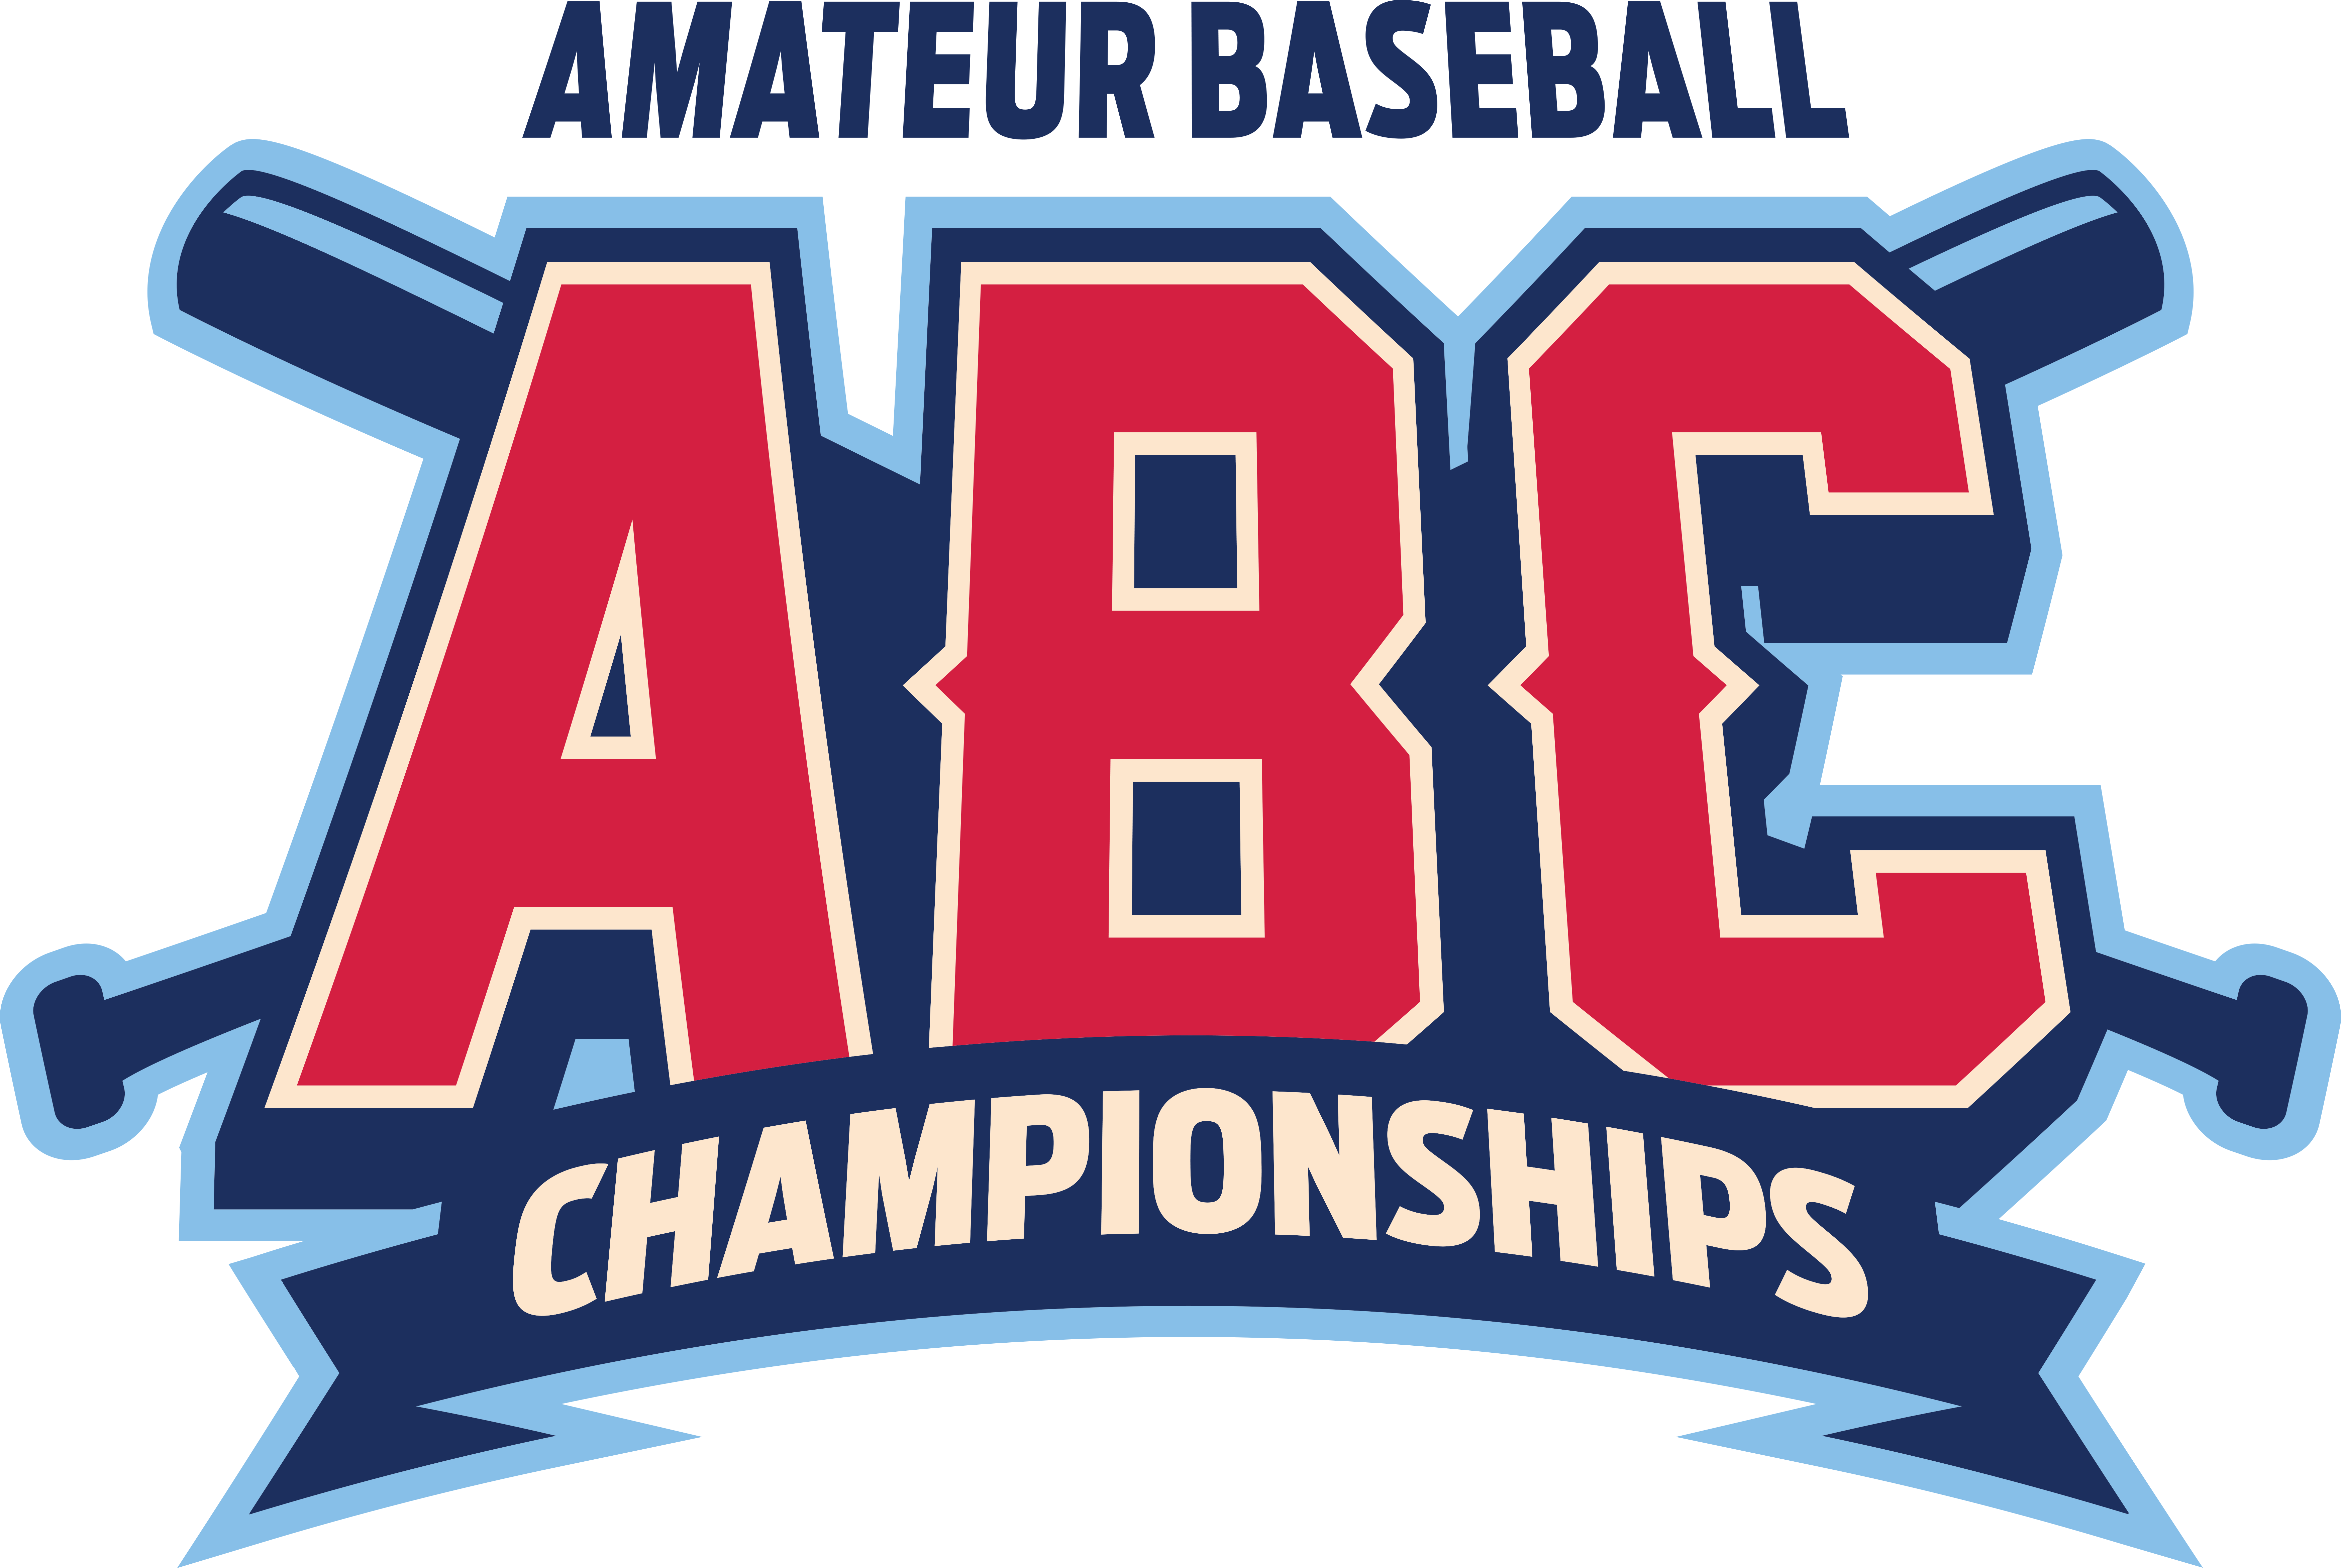 Youth Amateur Baseball Championships (D1 Only)